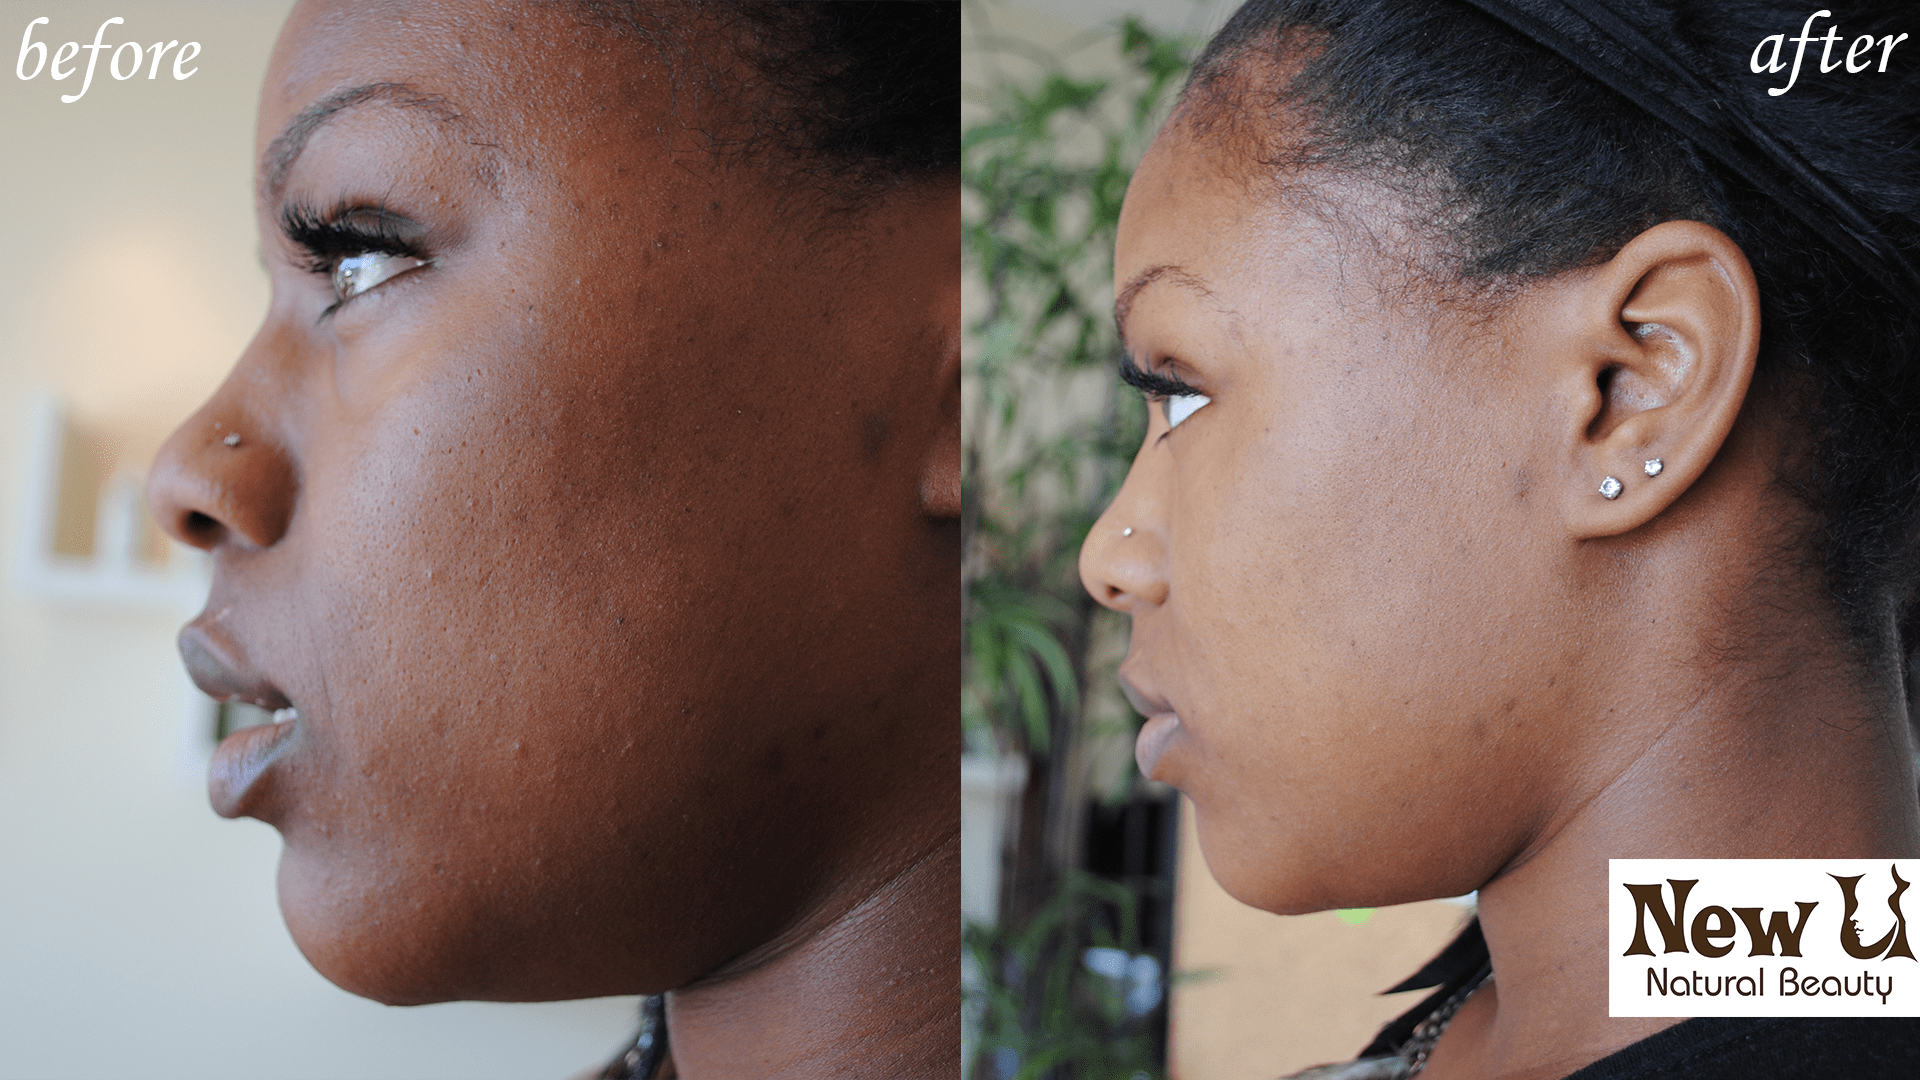 Acne Treatment 2 Las Vegas Before and After